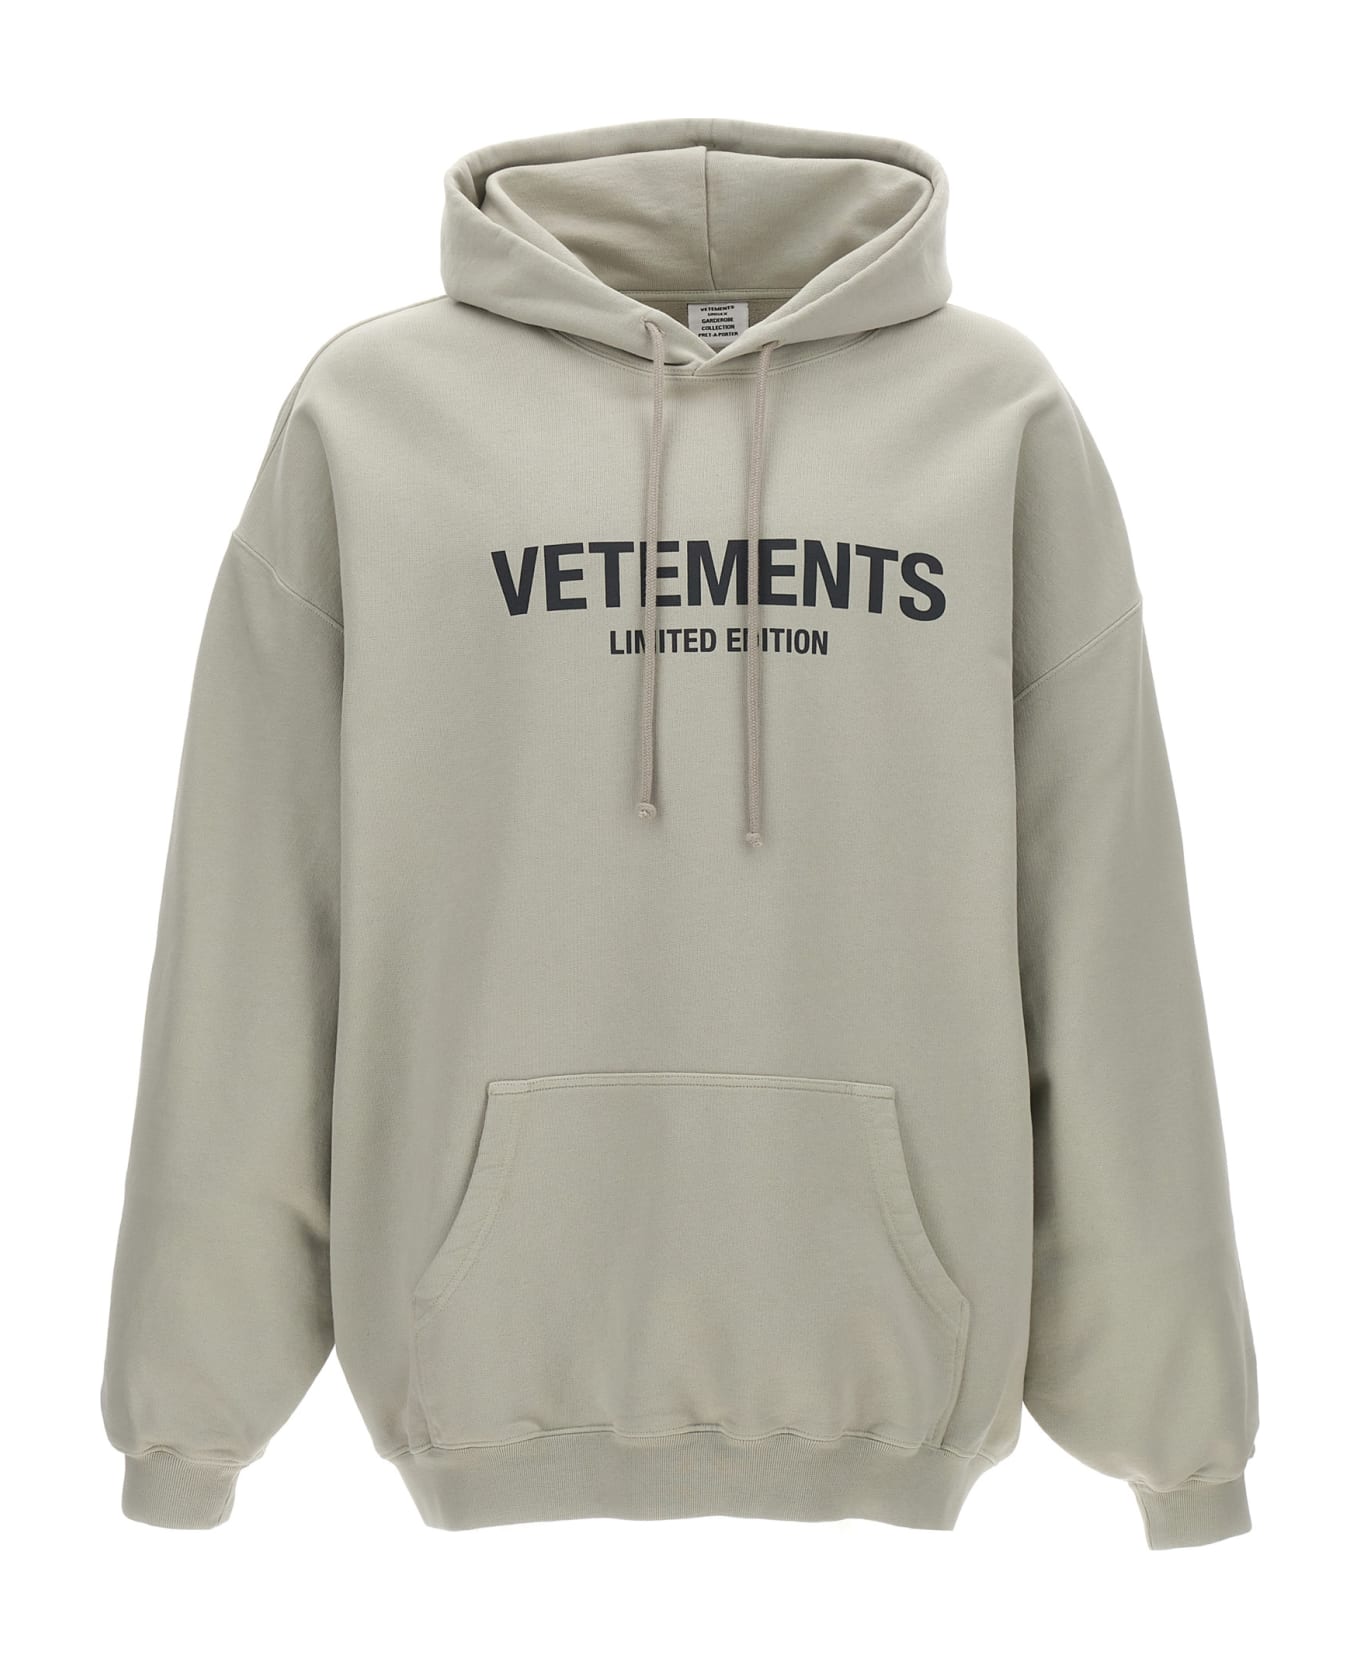 VETEMENTS 'limited Edition Logo' Hoodie - Gray